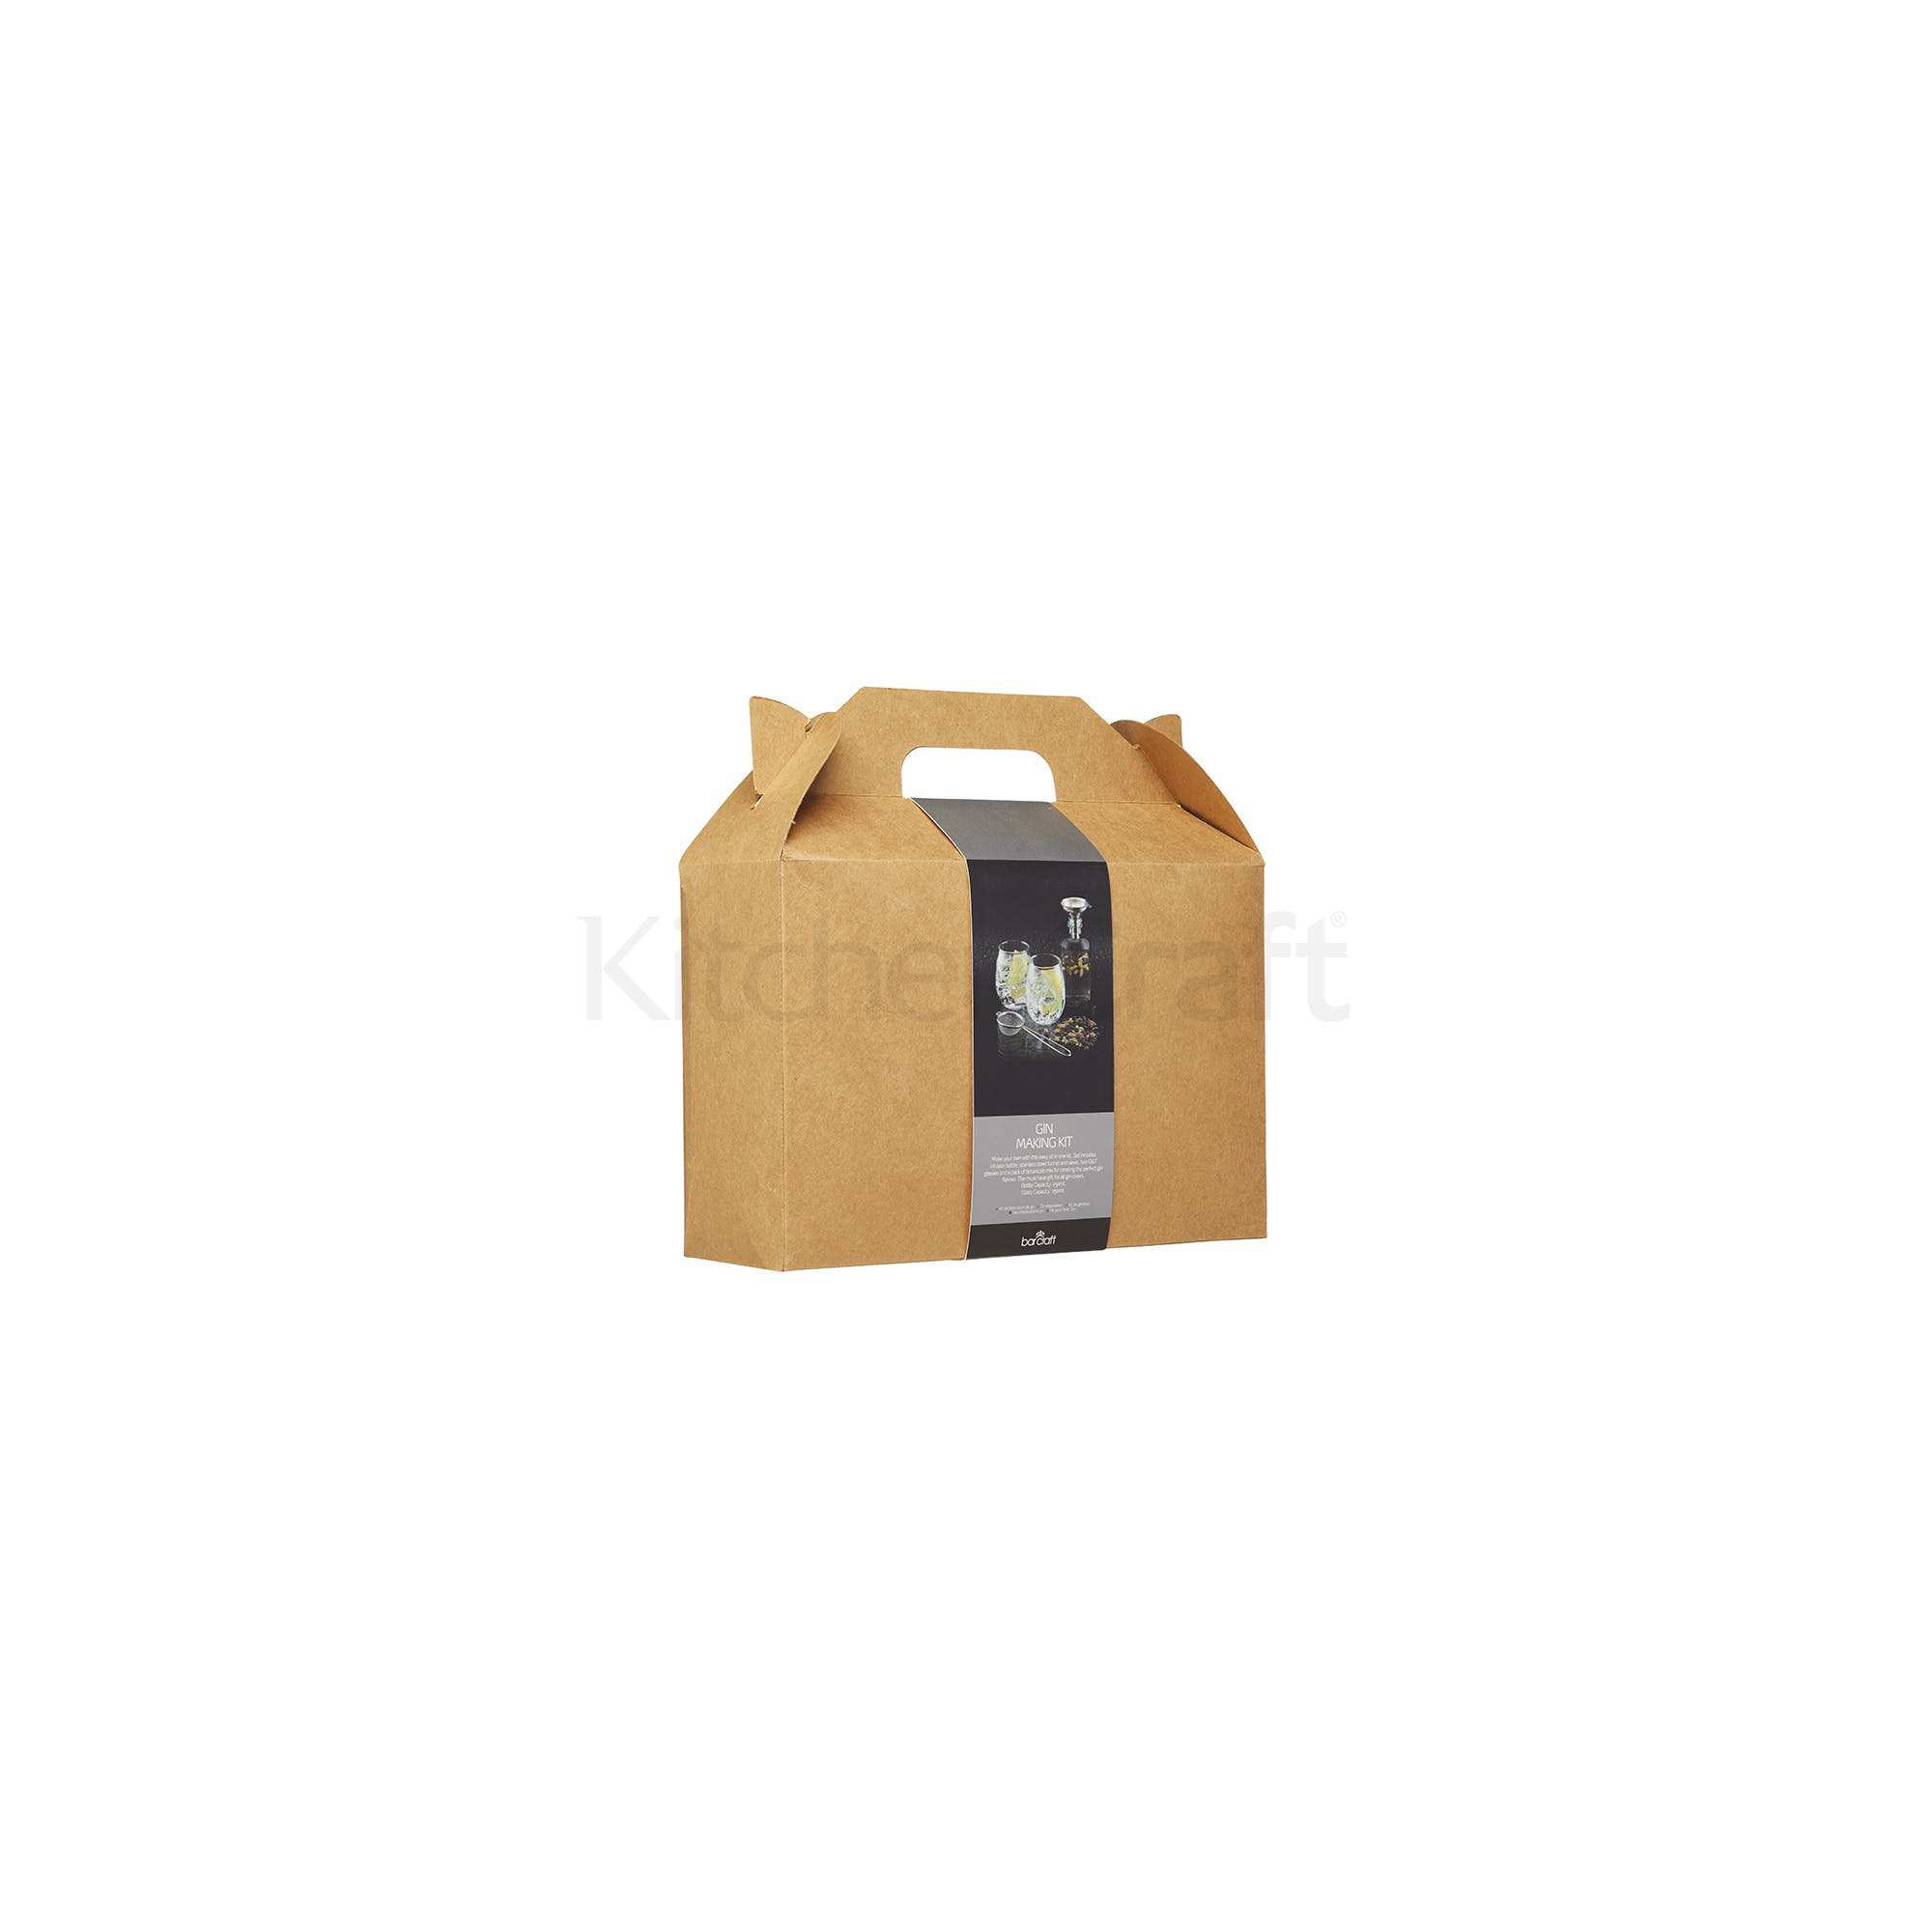 MM Hancrafted Gin Kit – Brewcraft